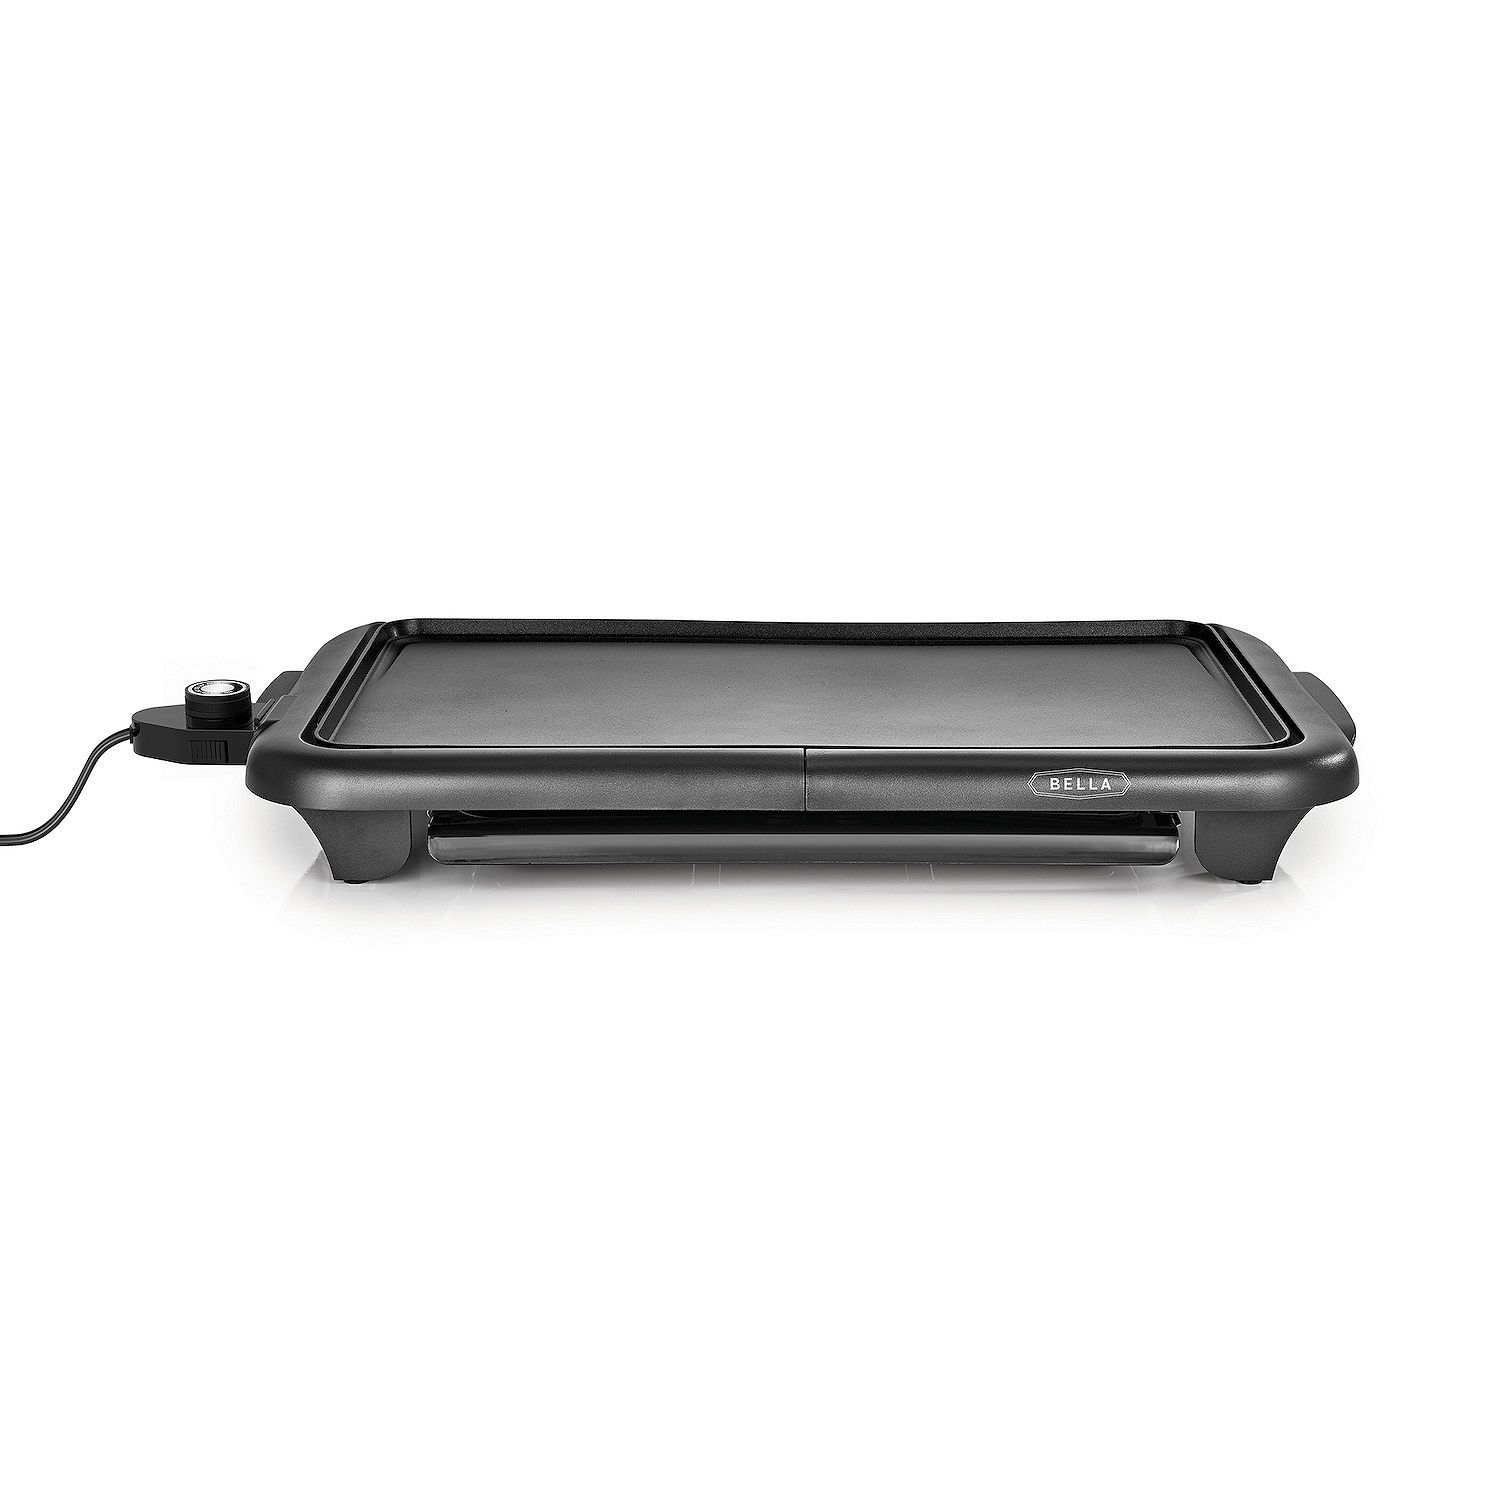 Photo 1 of Bella 10.5" x 18.5" Electric Griddle with Warming Tray